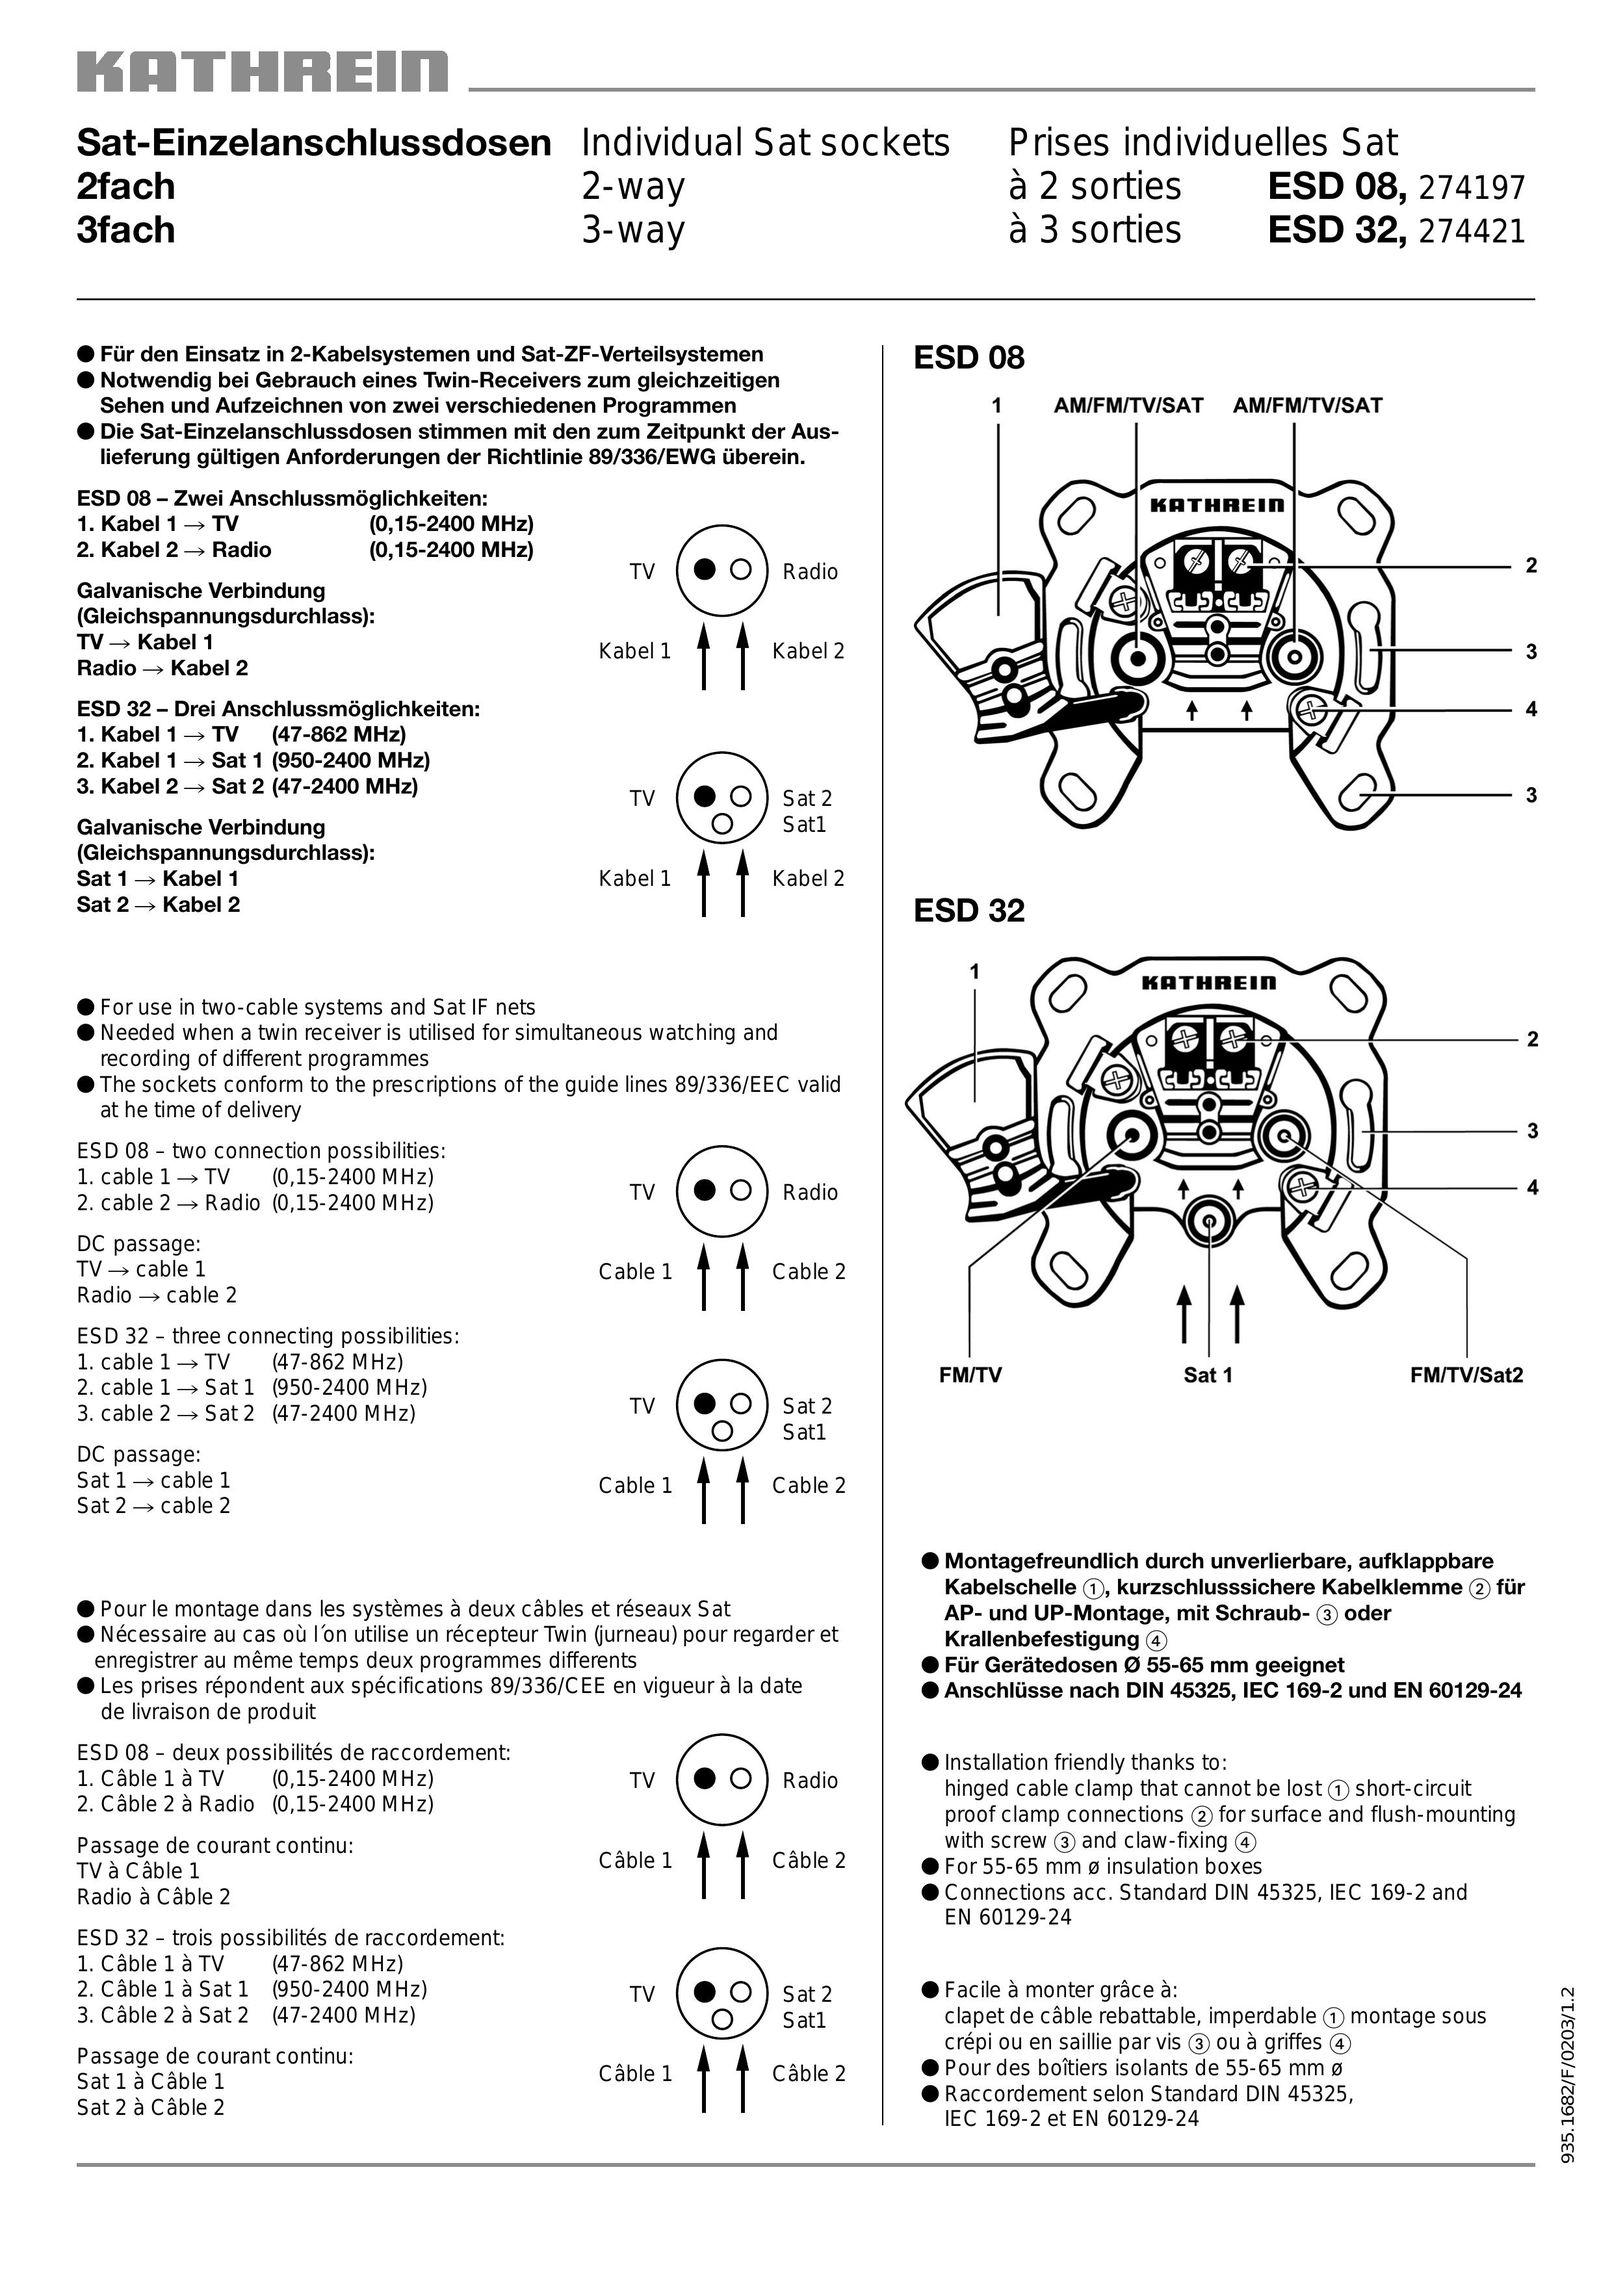 Kathrein ESD 32 TV Cables User Manual